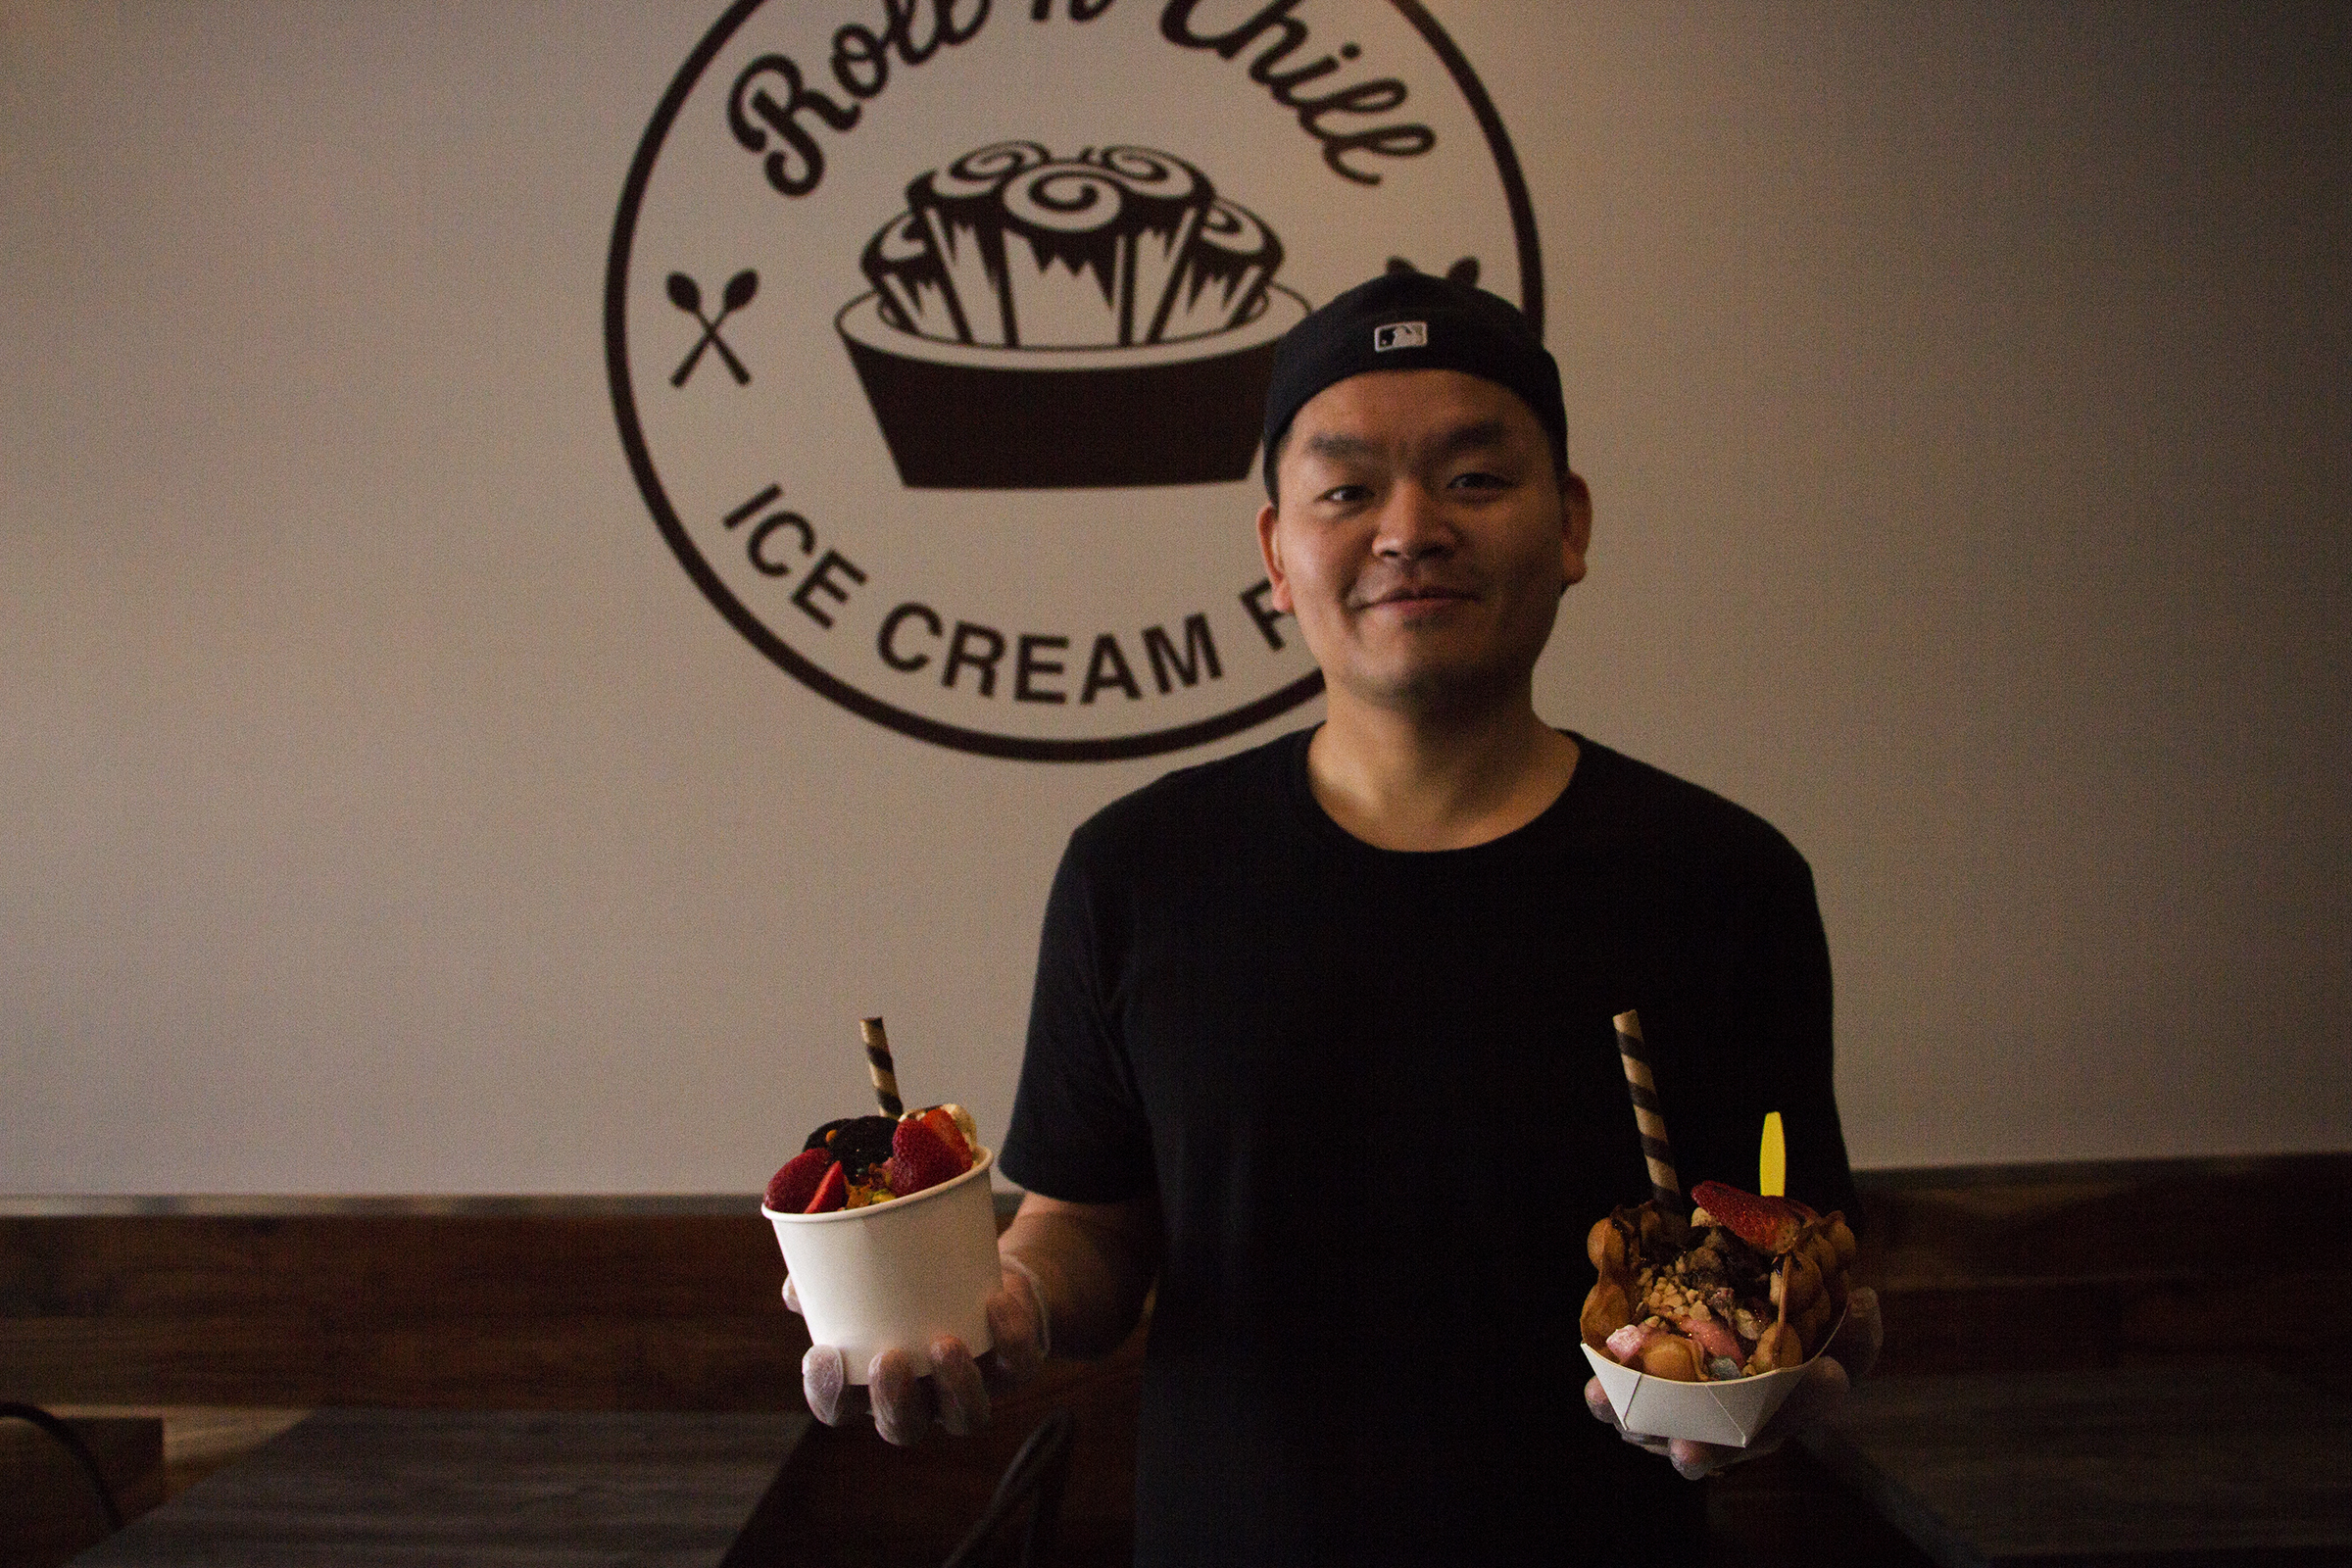 Roll ‘N’ Chill offers sweet treat to beat the heat